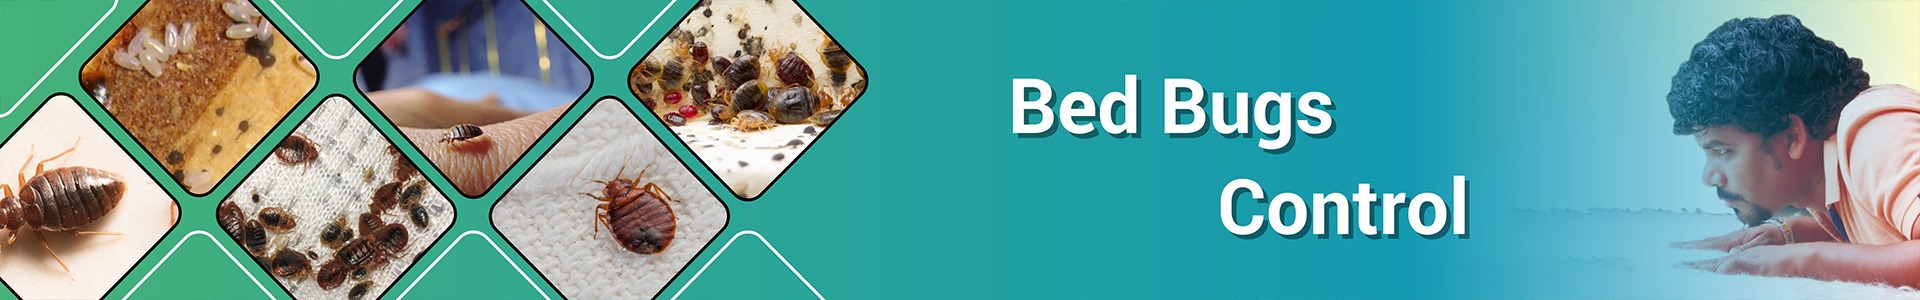 Bed Bug Control & Removal services